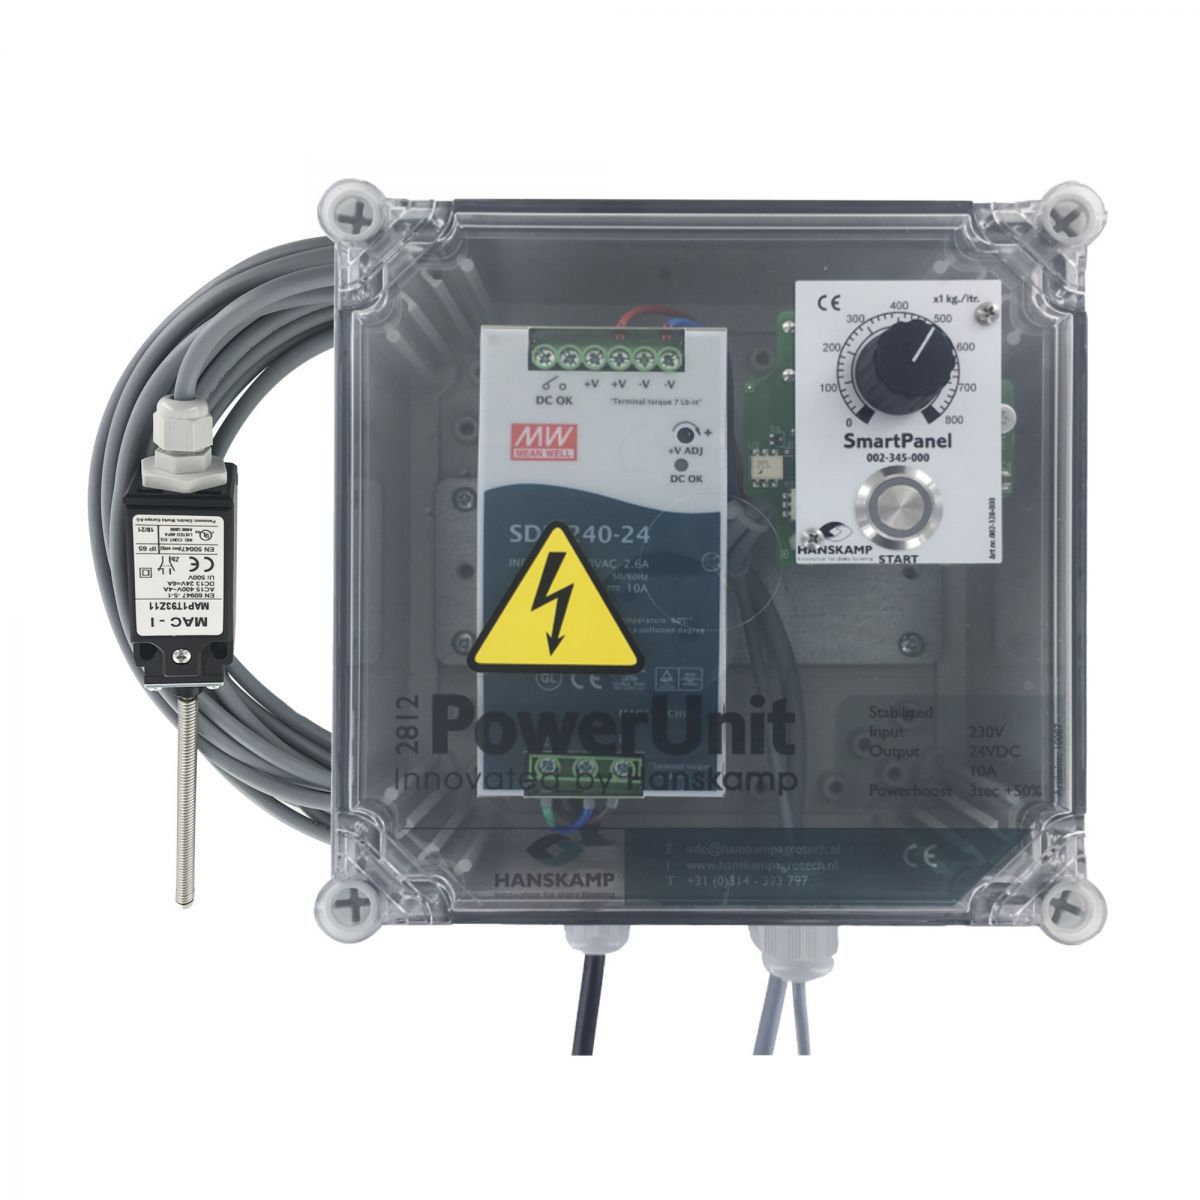 smartpanel in powerunit one type of food with limit switch 0800 g with graduated scale 